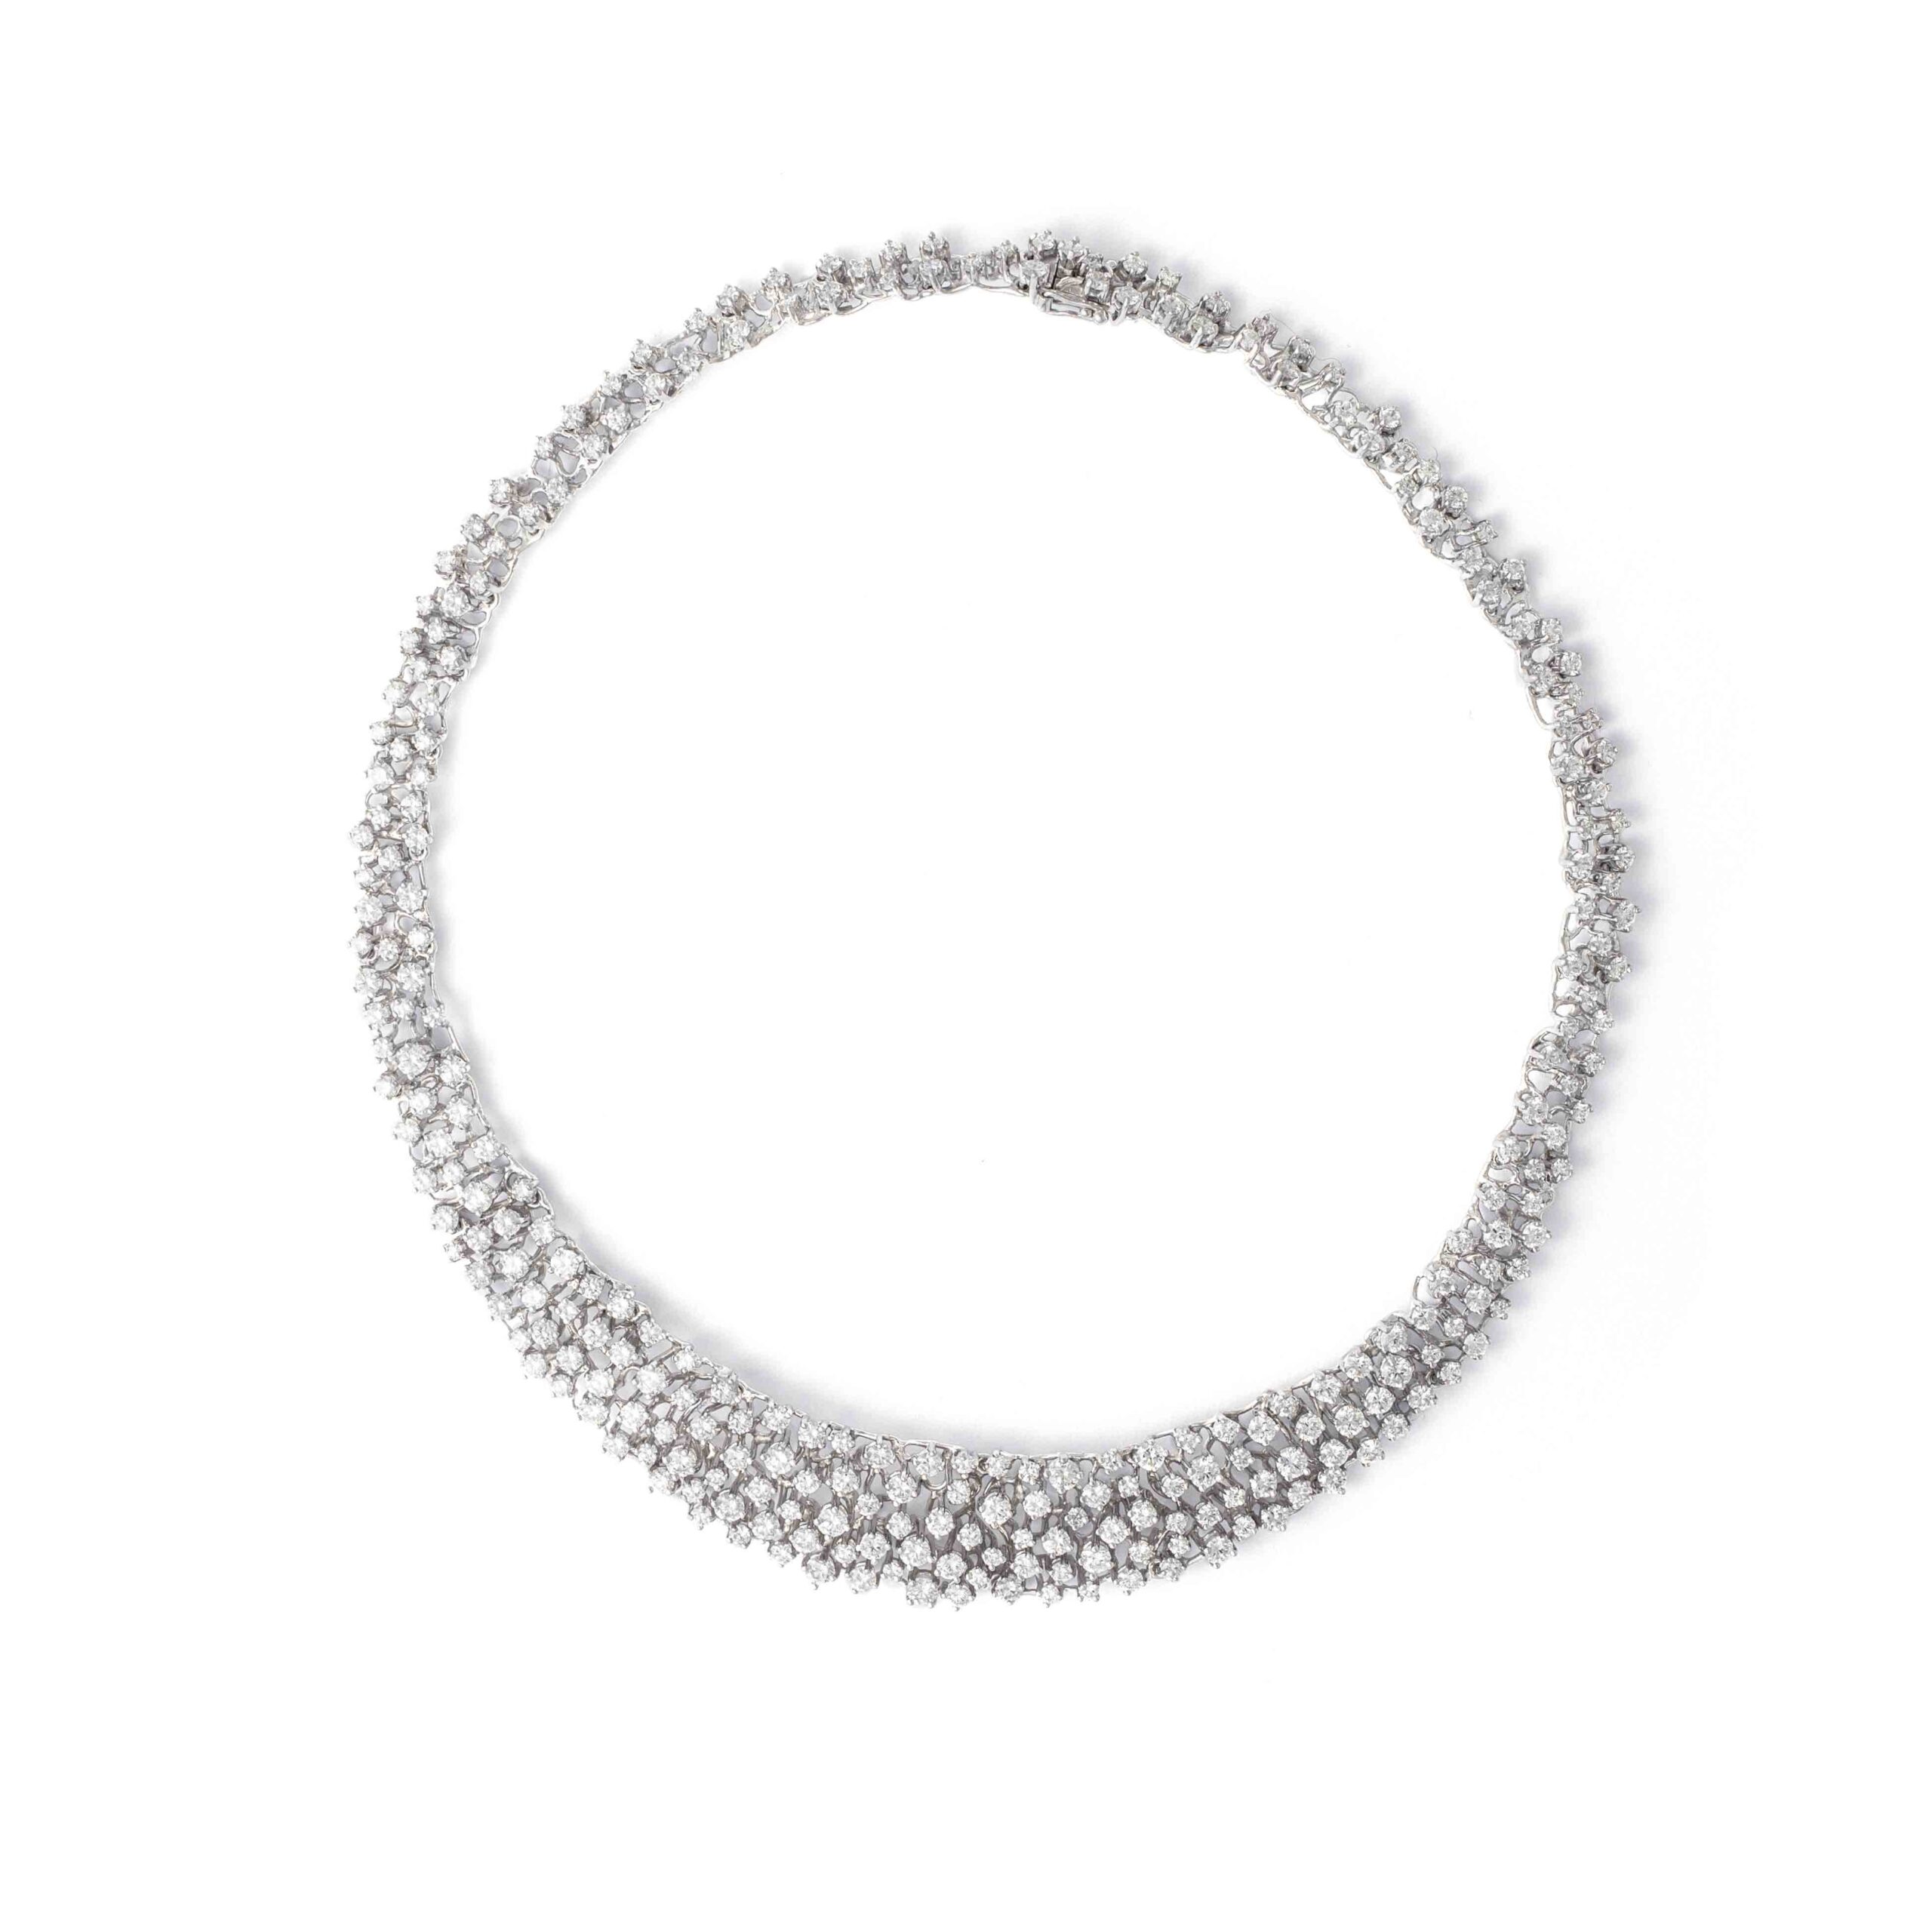 Diamond White Gold 18K Necklace. Total gross weight: 59.37 grams.